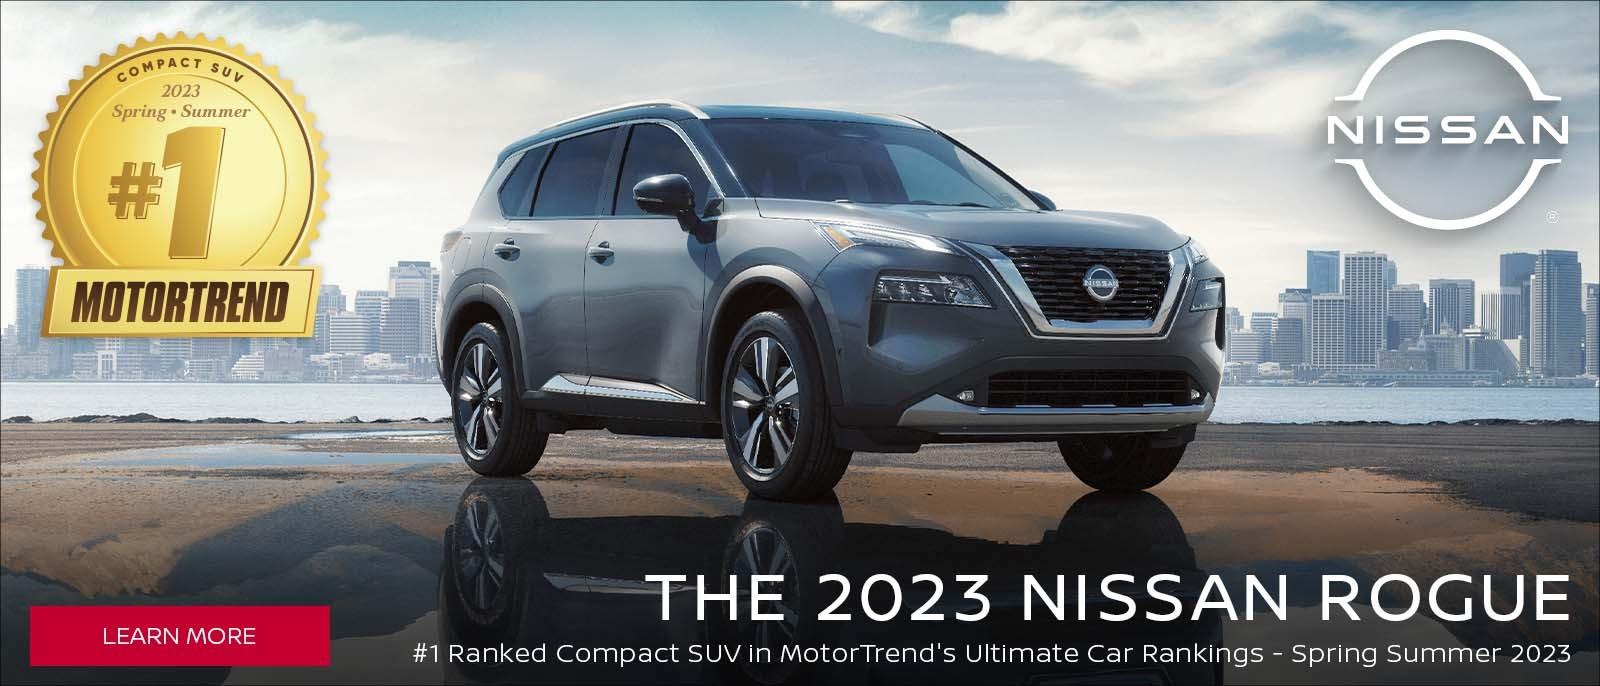 #1 Ranked Compact SUV In Motor Trend's Ultimate Car Rankings - Spring Summer 2023